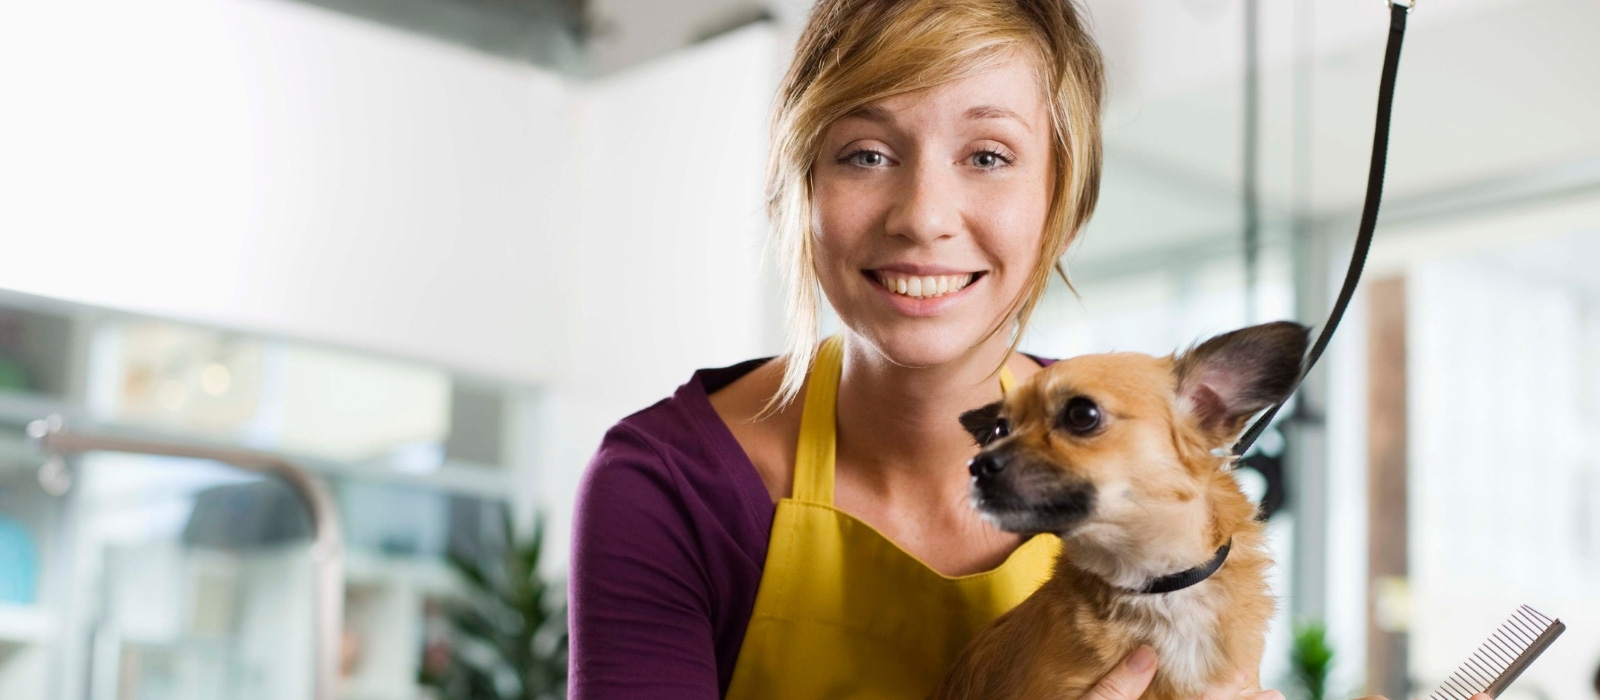 Turn your passion for animals into a rewarding and fulfilling career